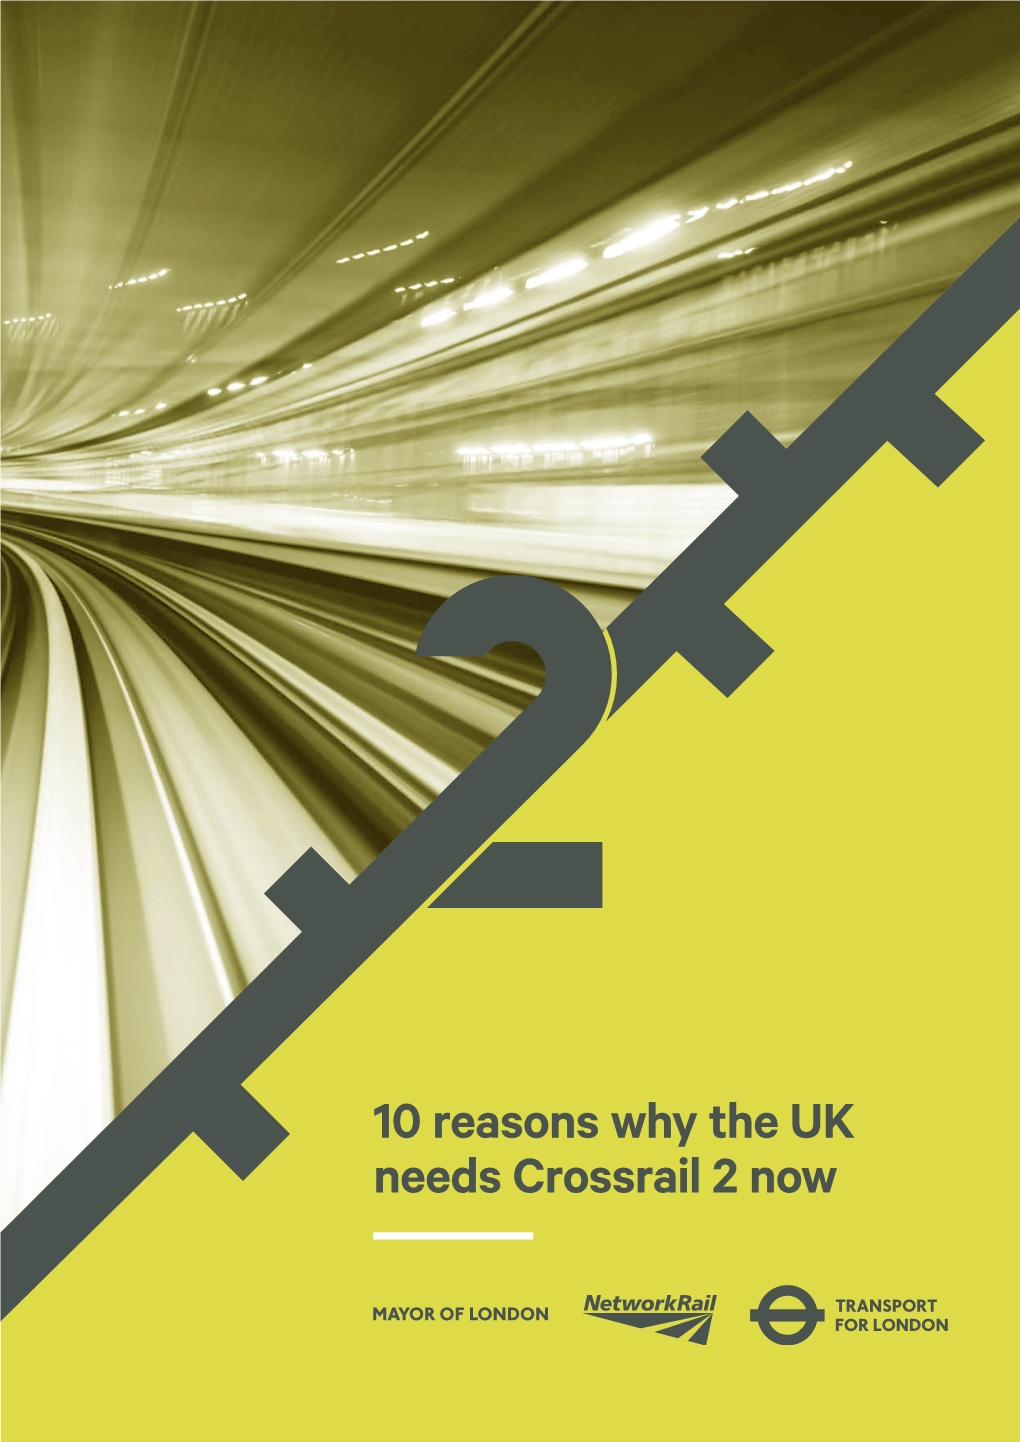 10 Reasons Why the UK Needs Crossrail 2 Now 10 Reasons Why the UK Needs Crossrail 2 Now